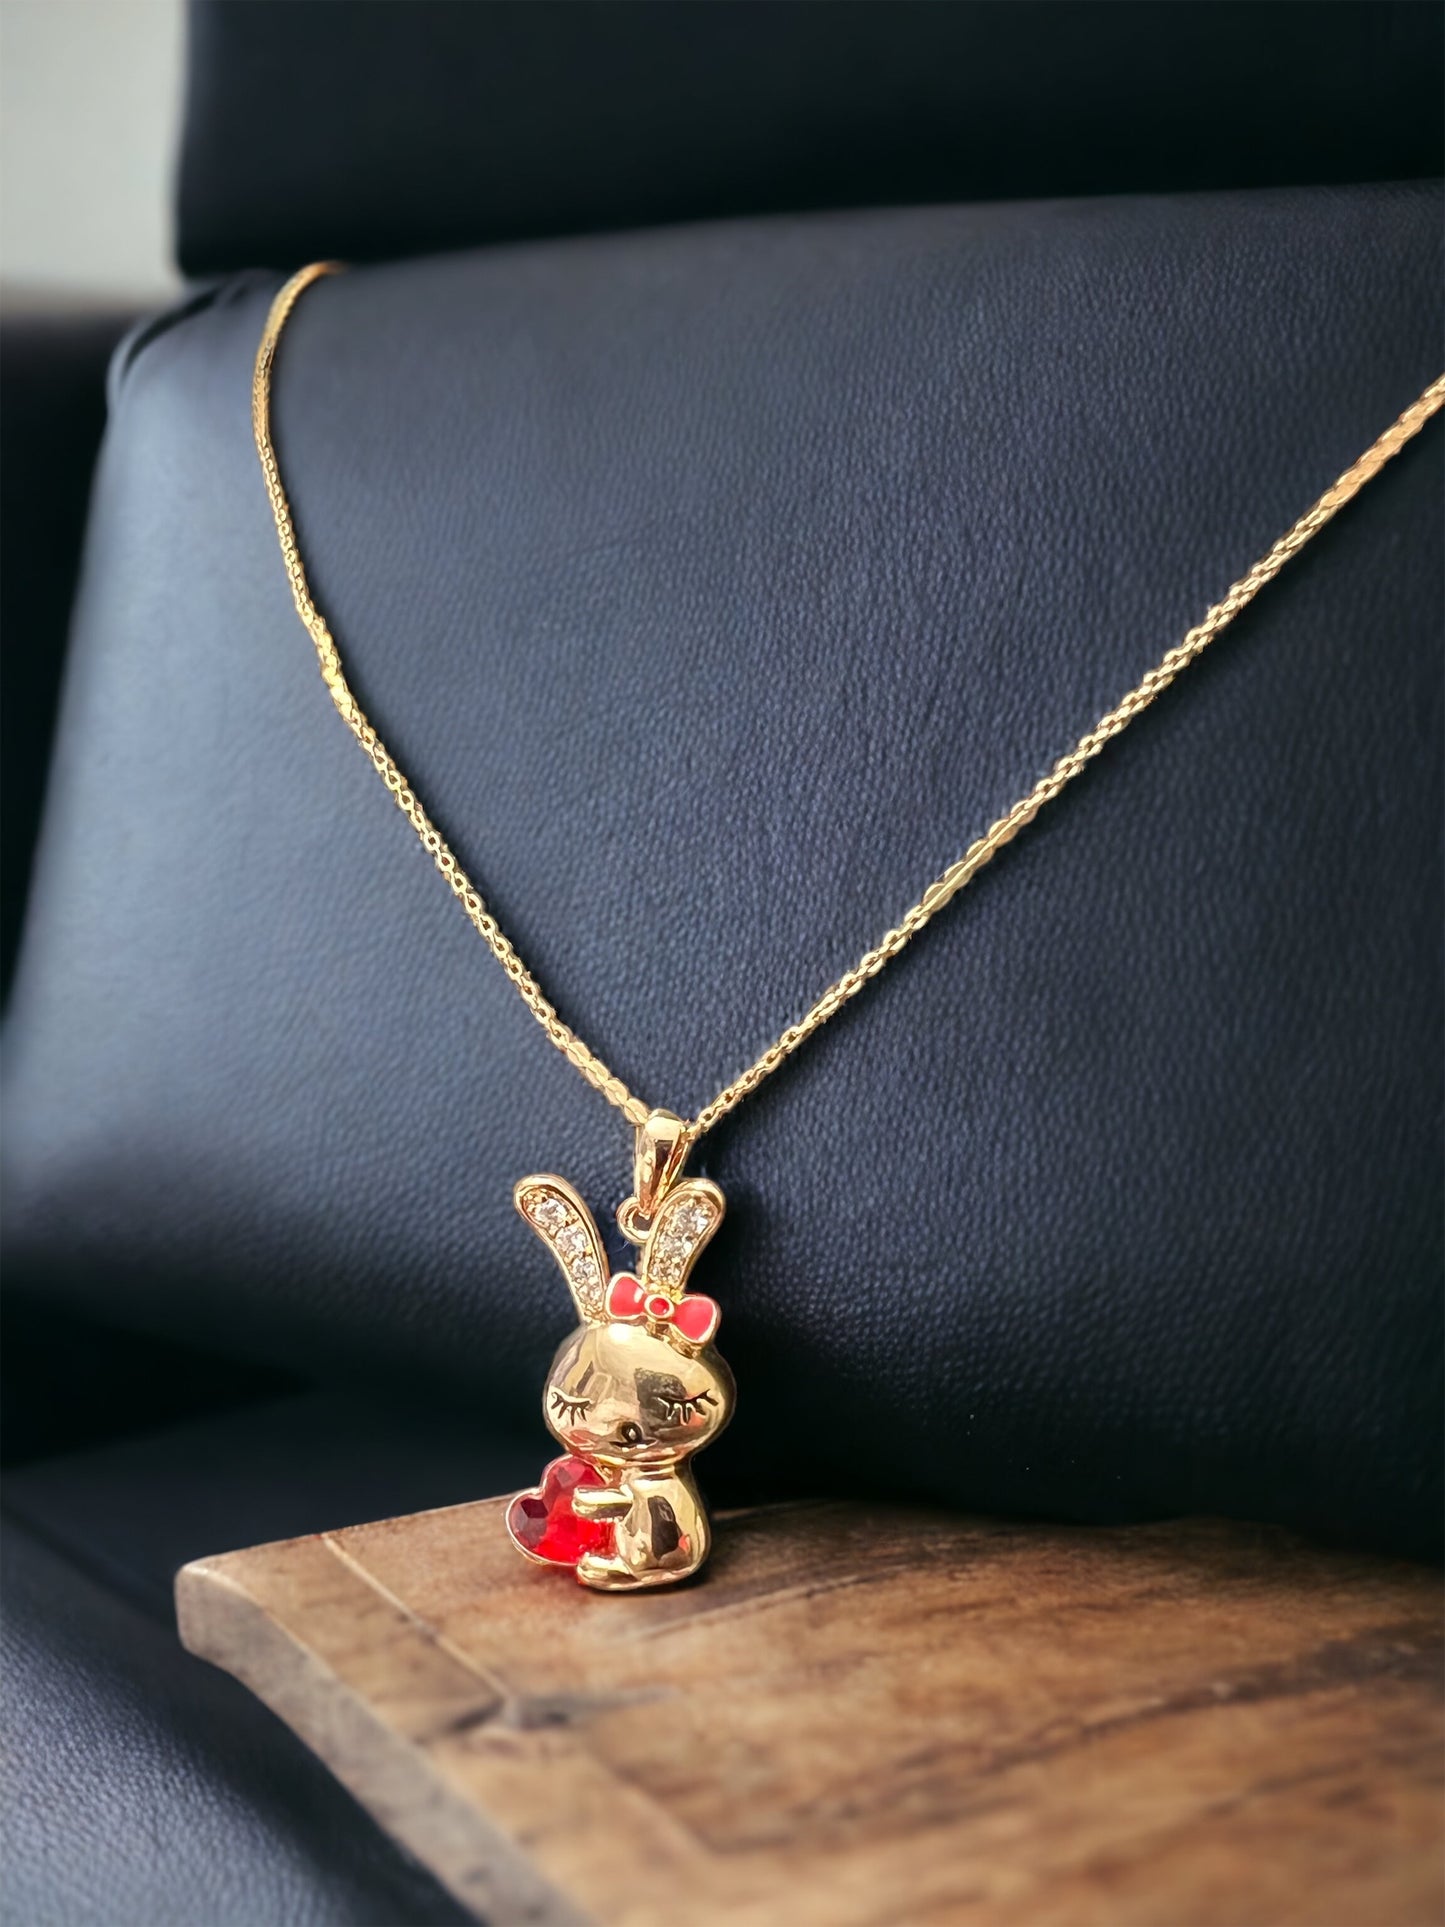 Gold Bunny Necklace With Red Heart Crystal